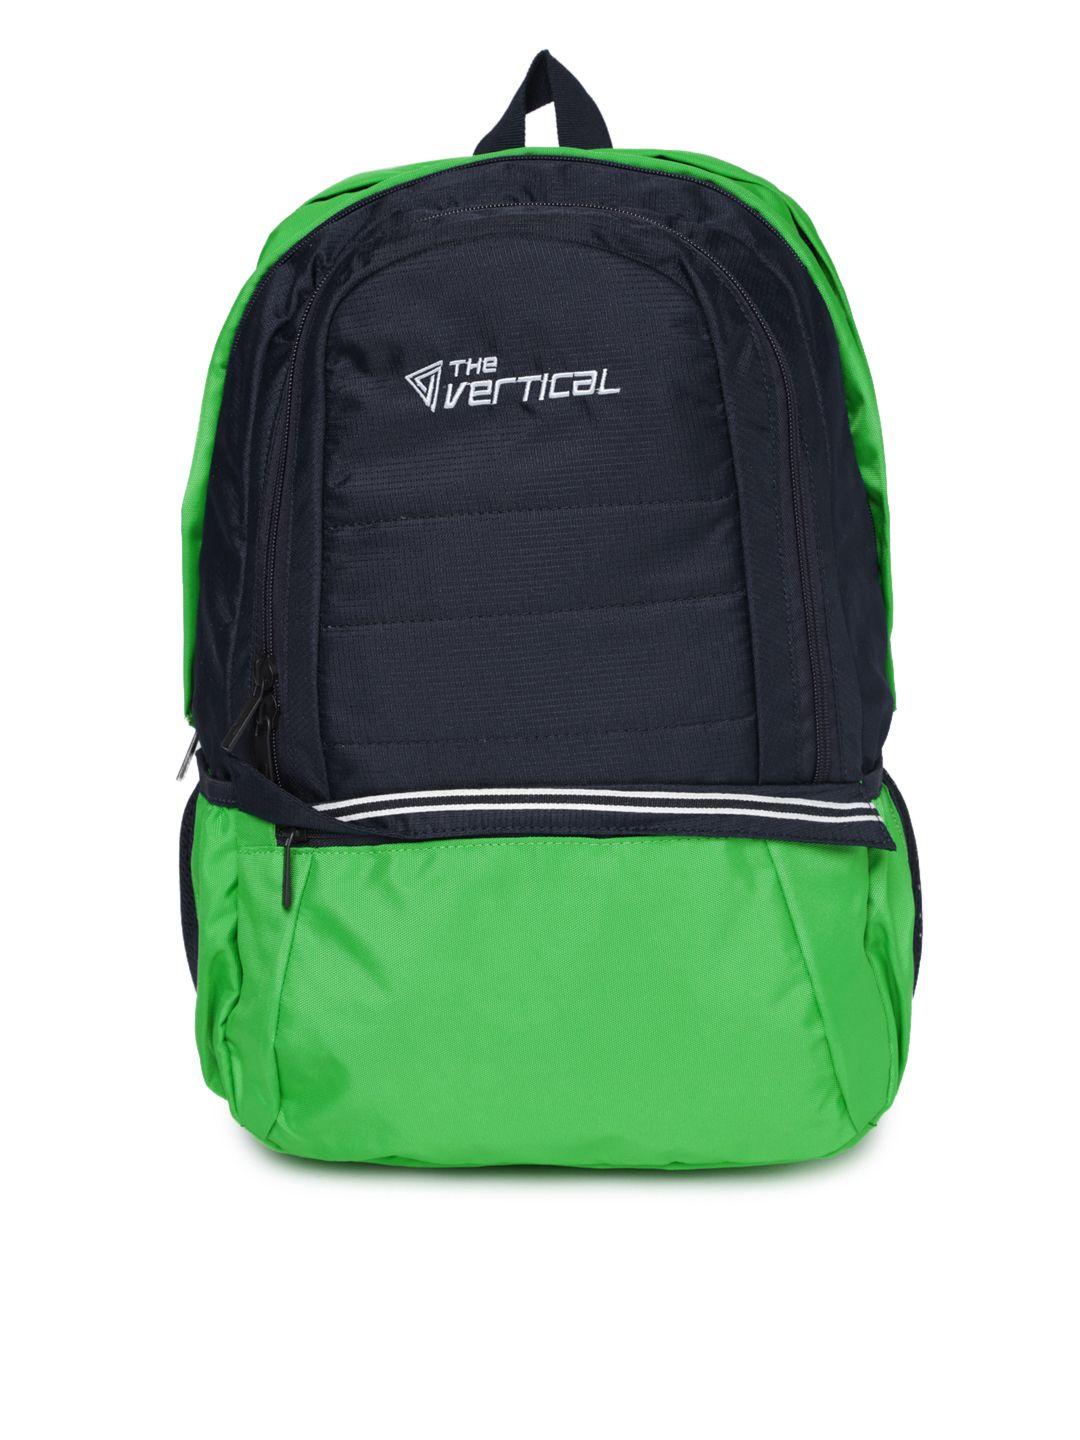 the-vertical-unisex-navy-&-green-laptop-backpack